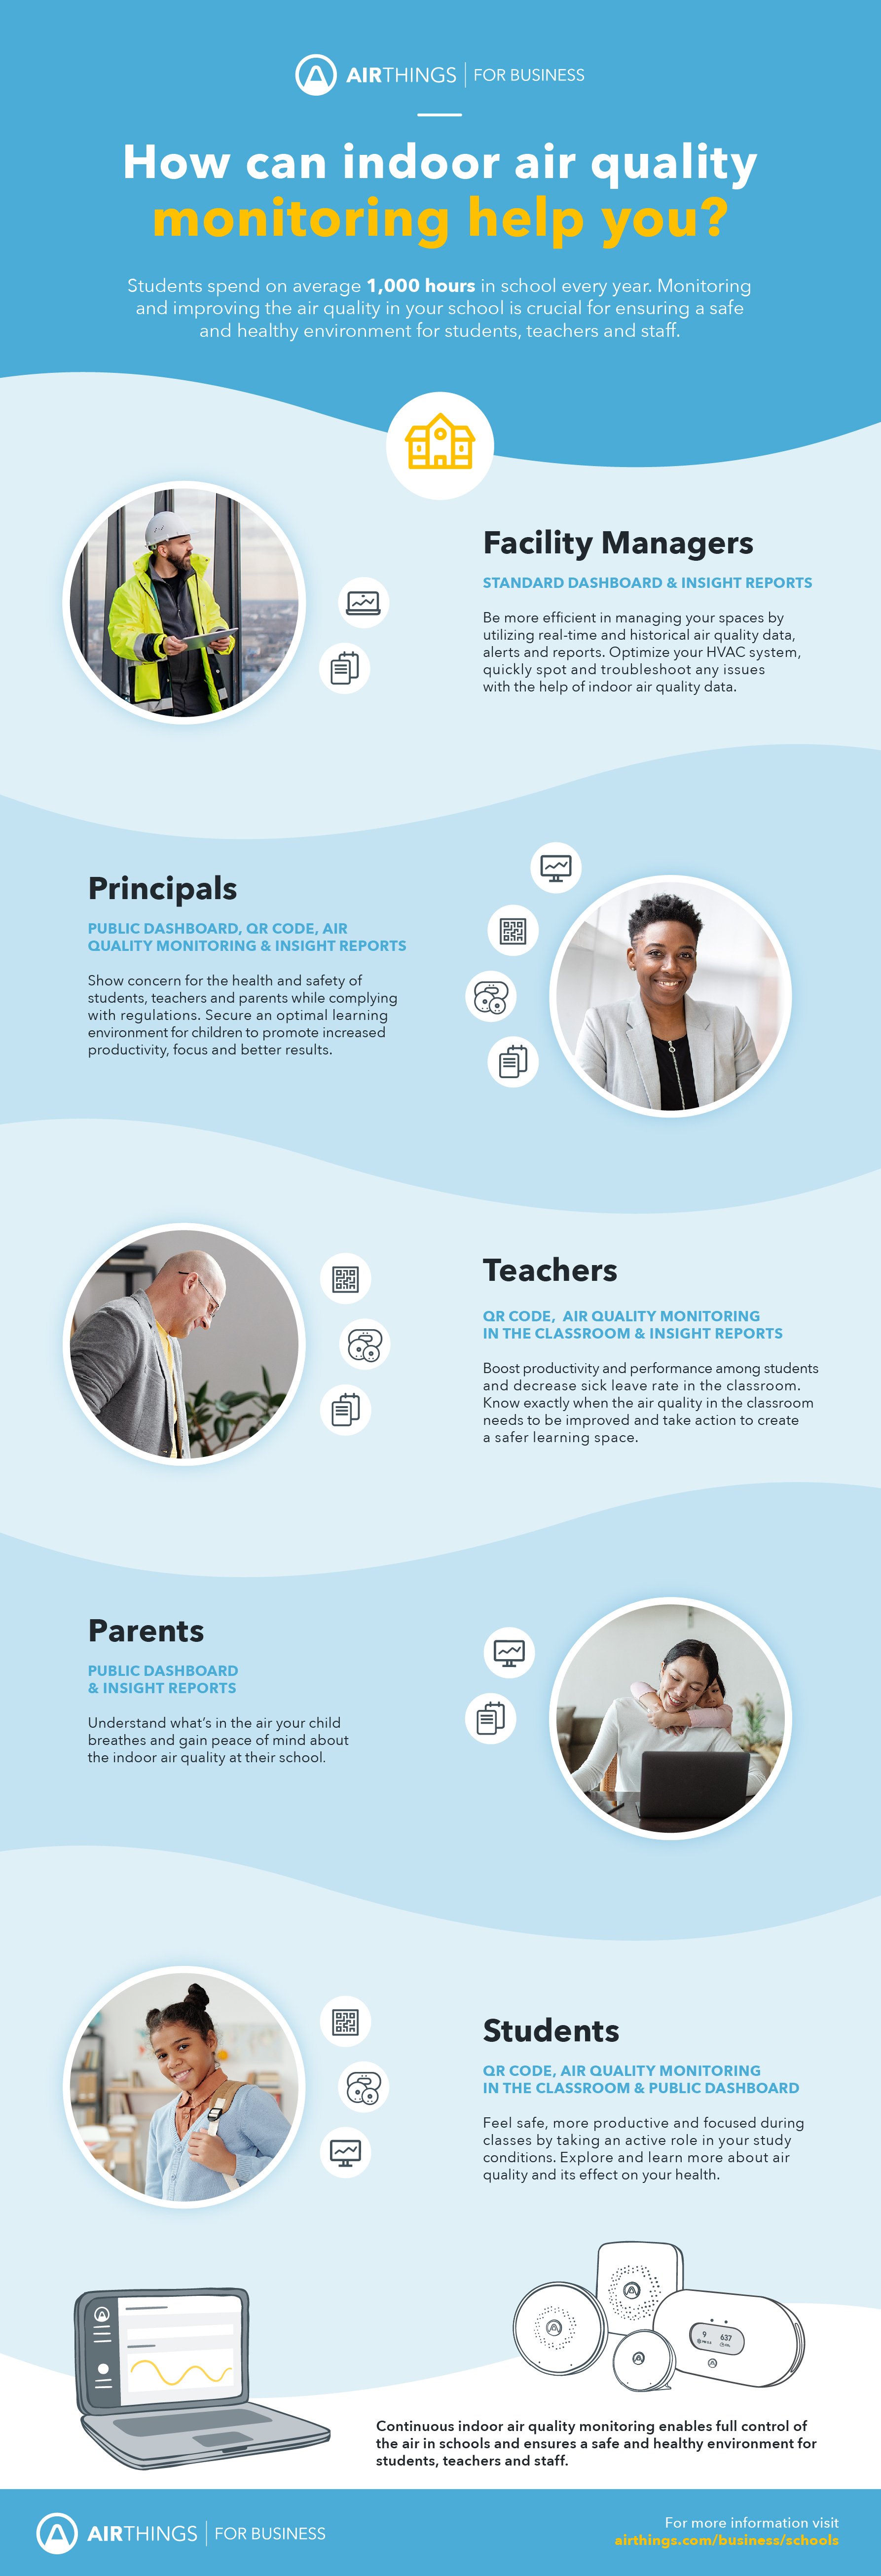 Airthings_School personas_infographic